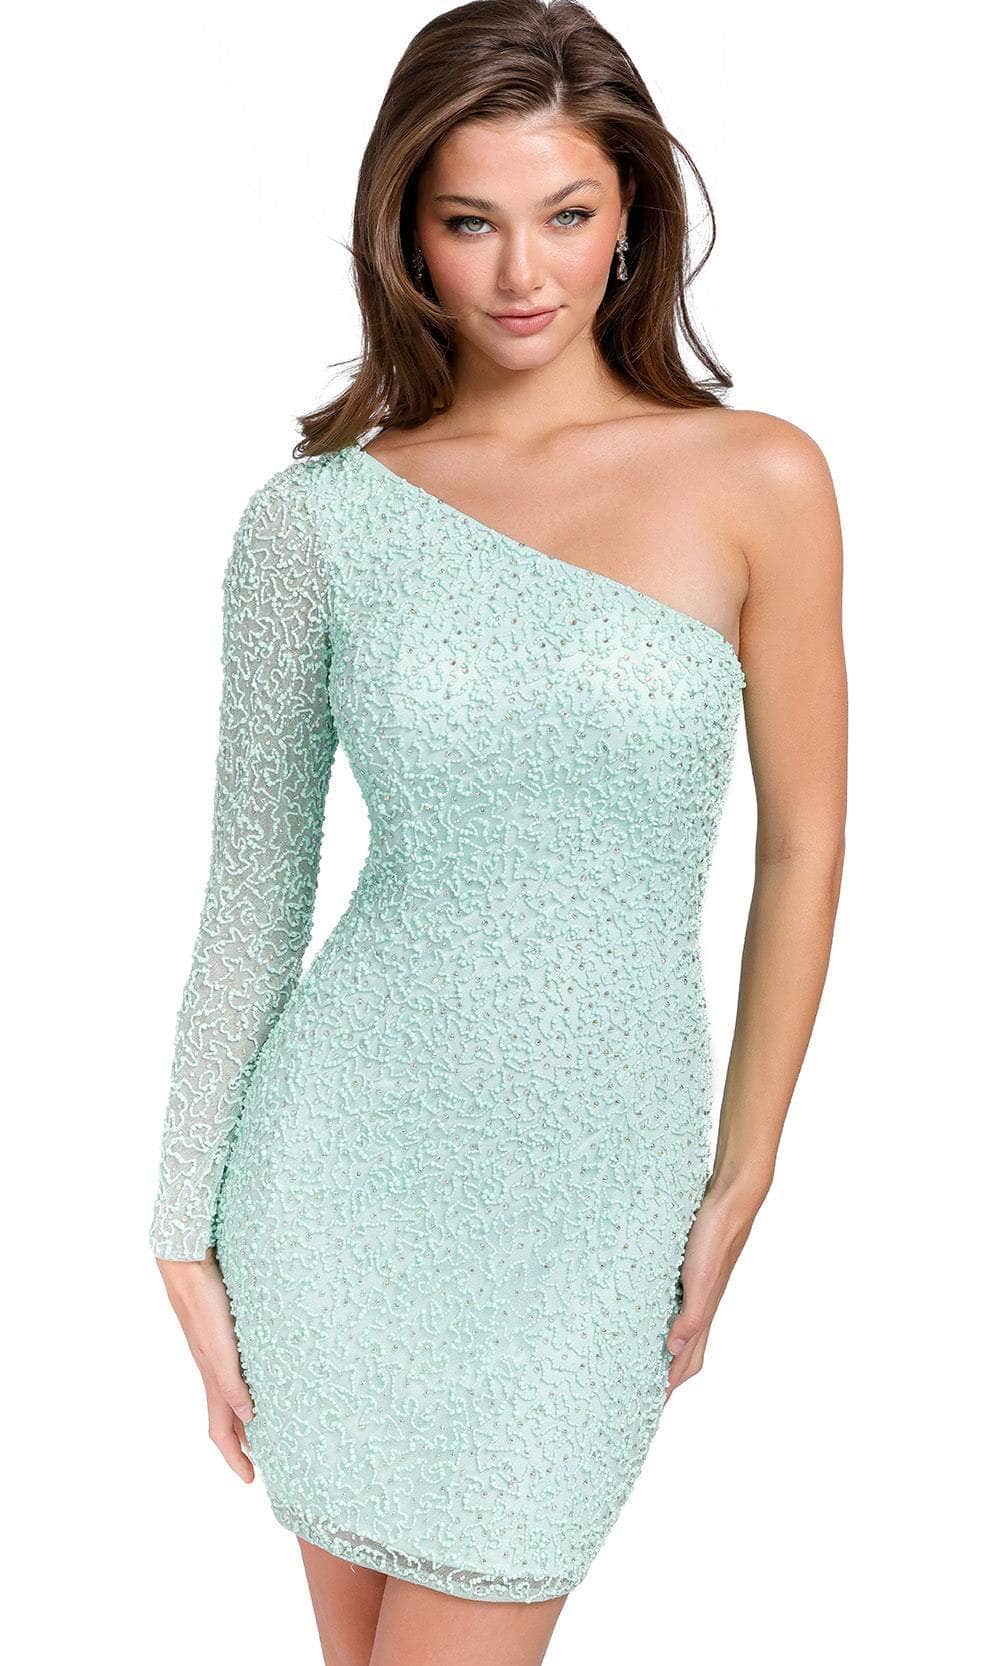 Primavera Couture 3849 - One Shoulder Long Sleeve Cocktail Dress Special Occasion Dress 00 / Mint